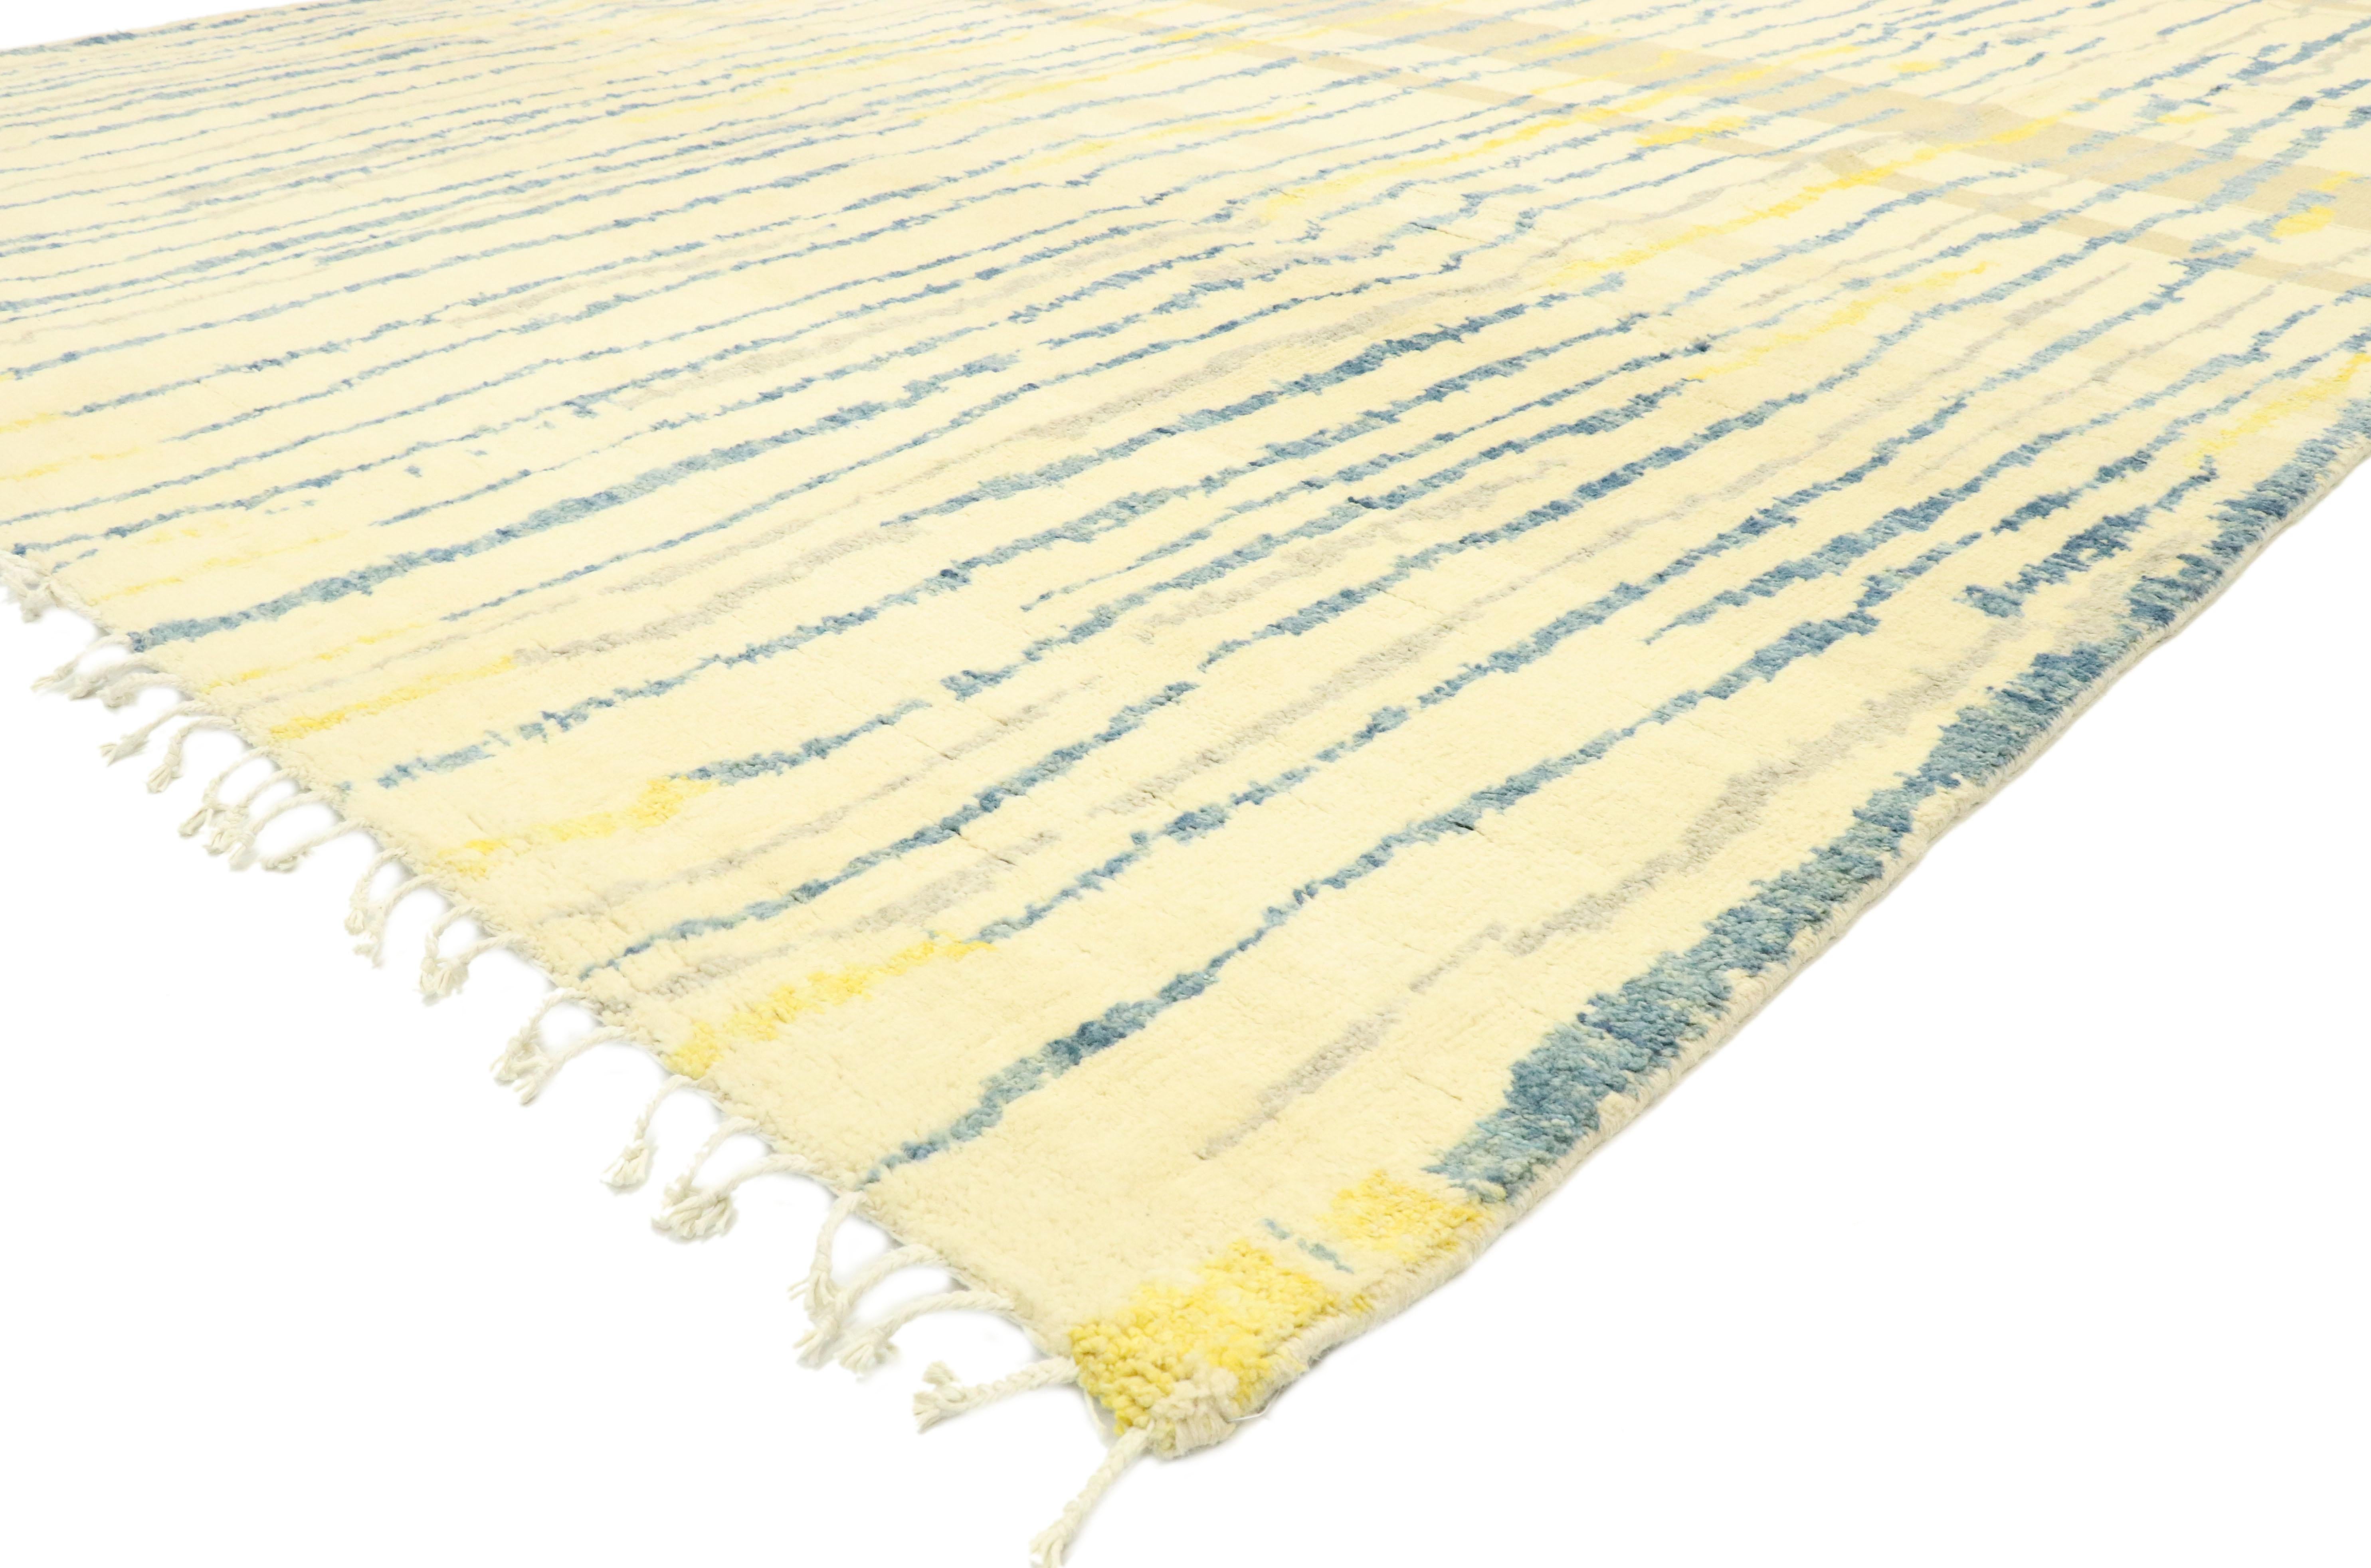 80634, new contemporary Moroccan Area rug. Displaying asymmetrical spontaneity and gradations of color, this hand knotted wool contemporary Moroccan area rug features a linear design element composed of asymmetrical lines and chevron zigzags that